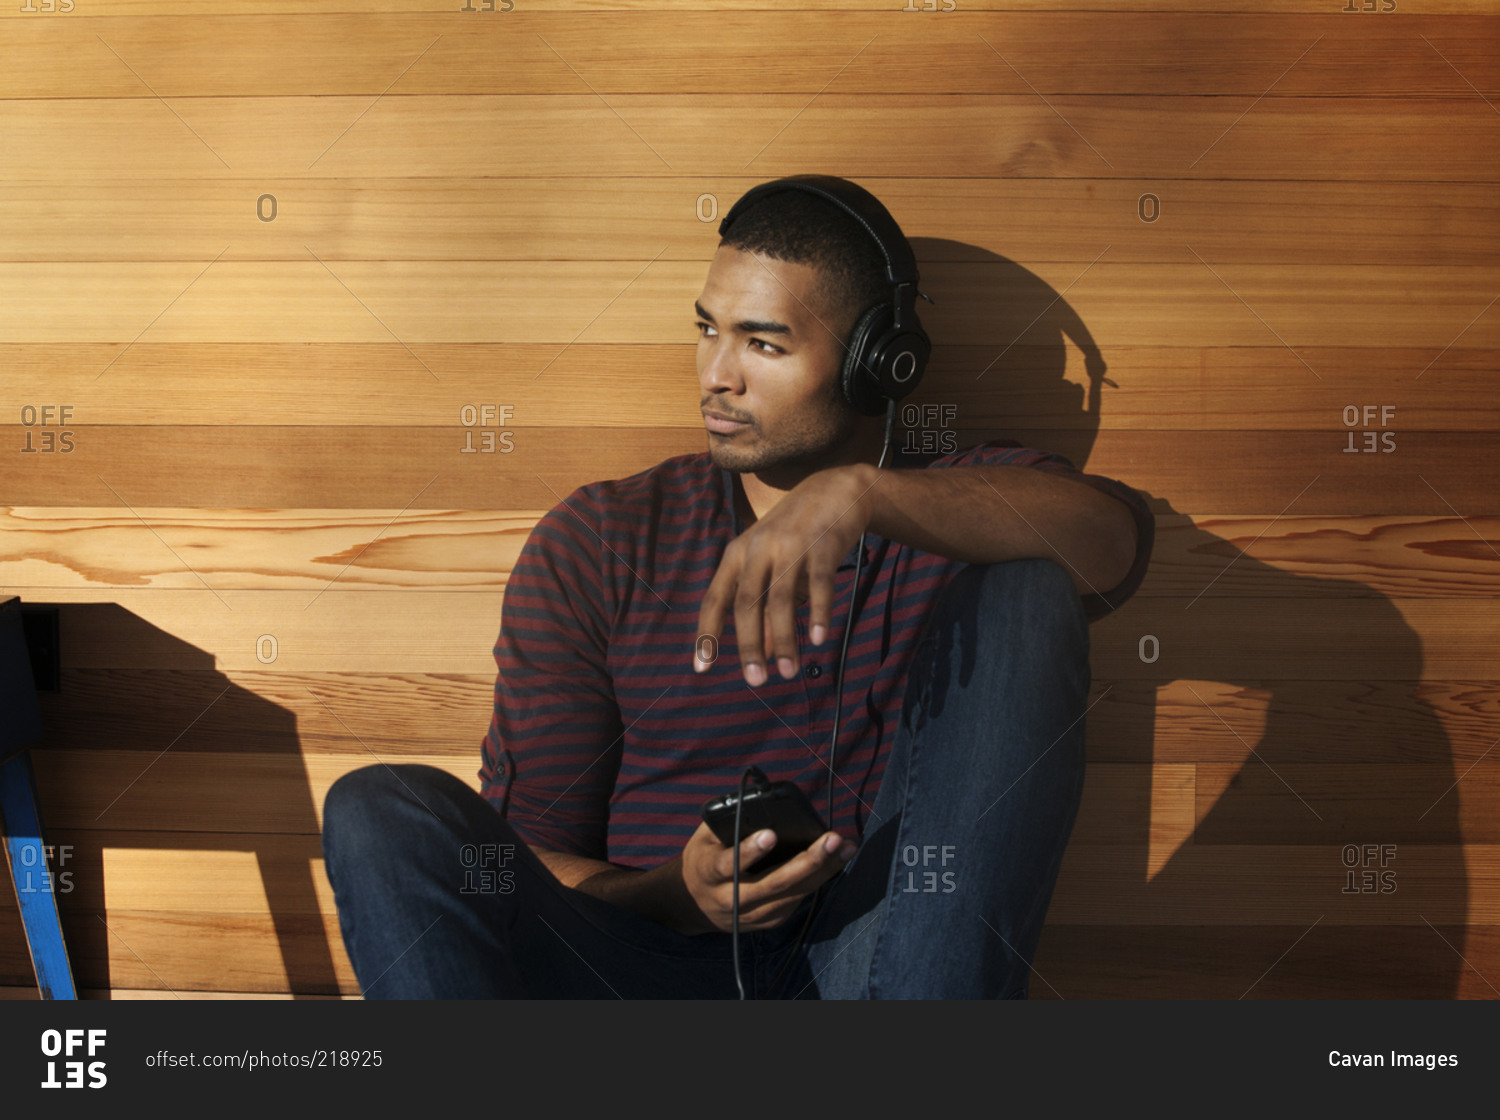 A young man leans against a wood paneled wall and wears headphones